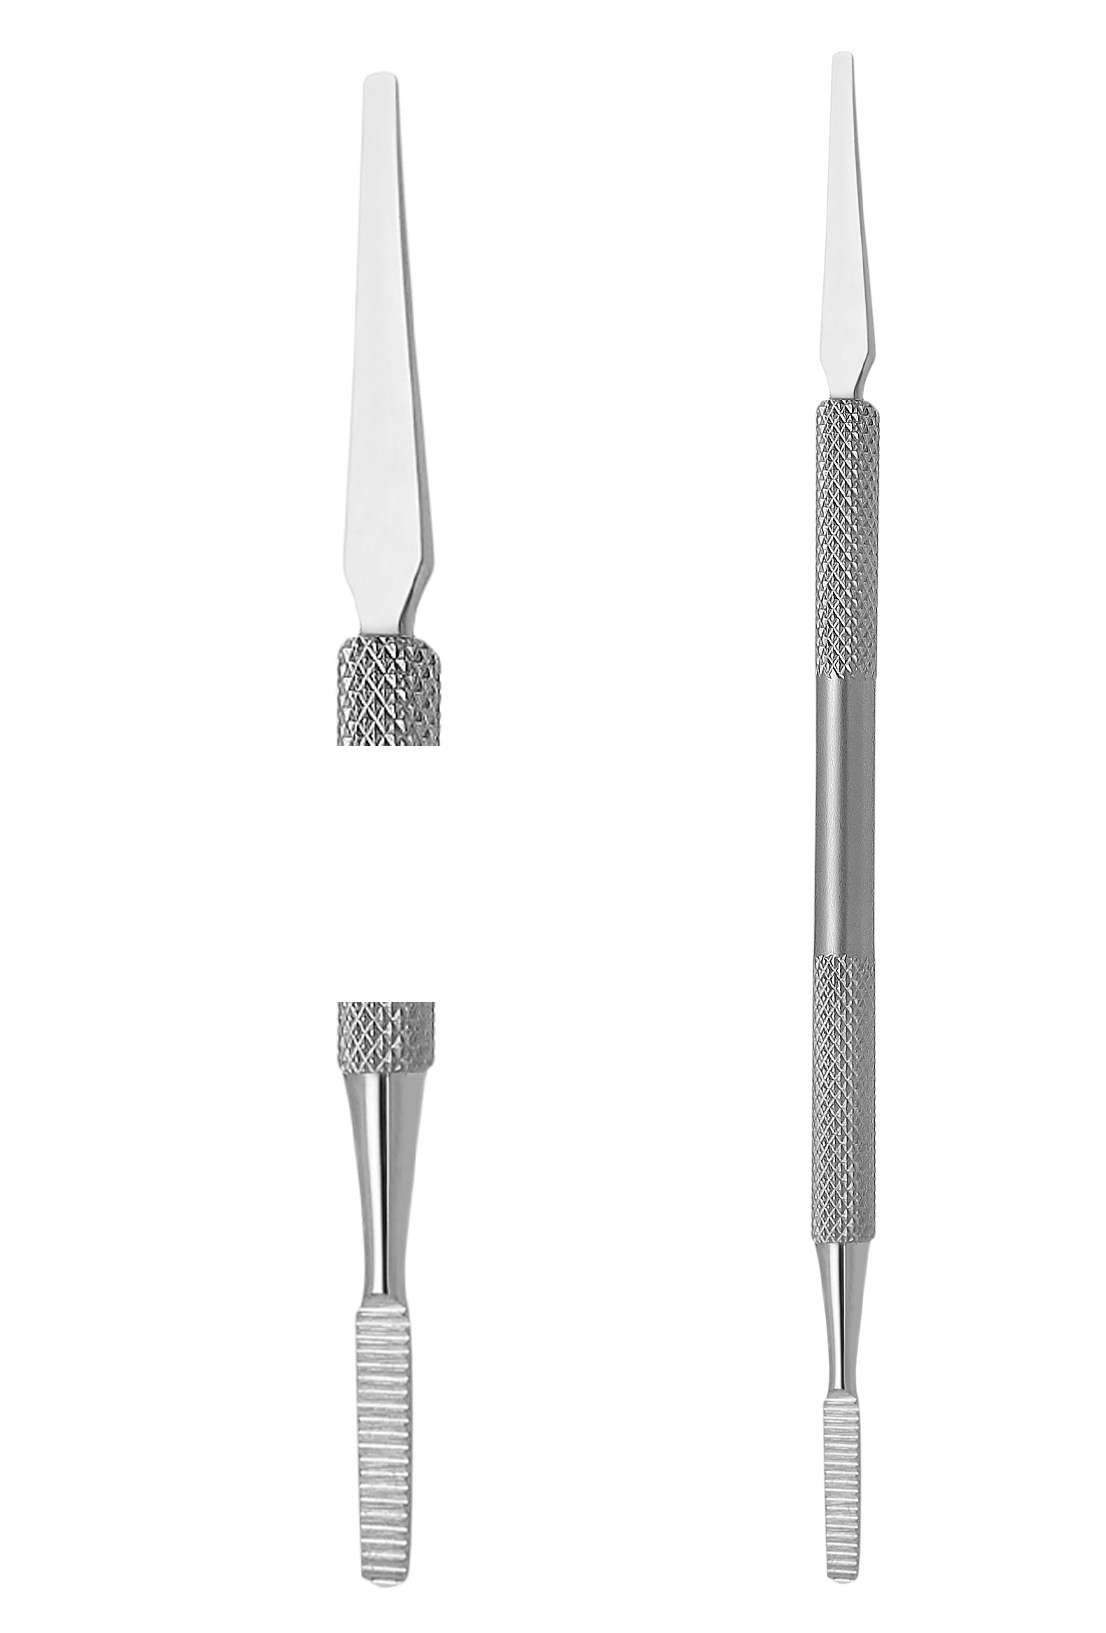 Excellent nail corner file & cuticle pusher double sided 